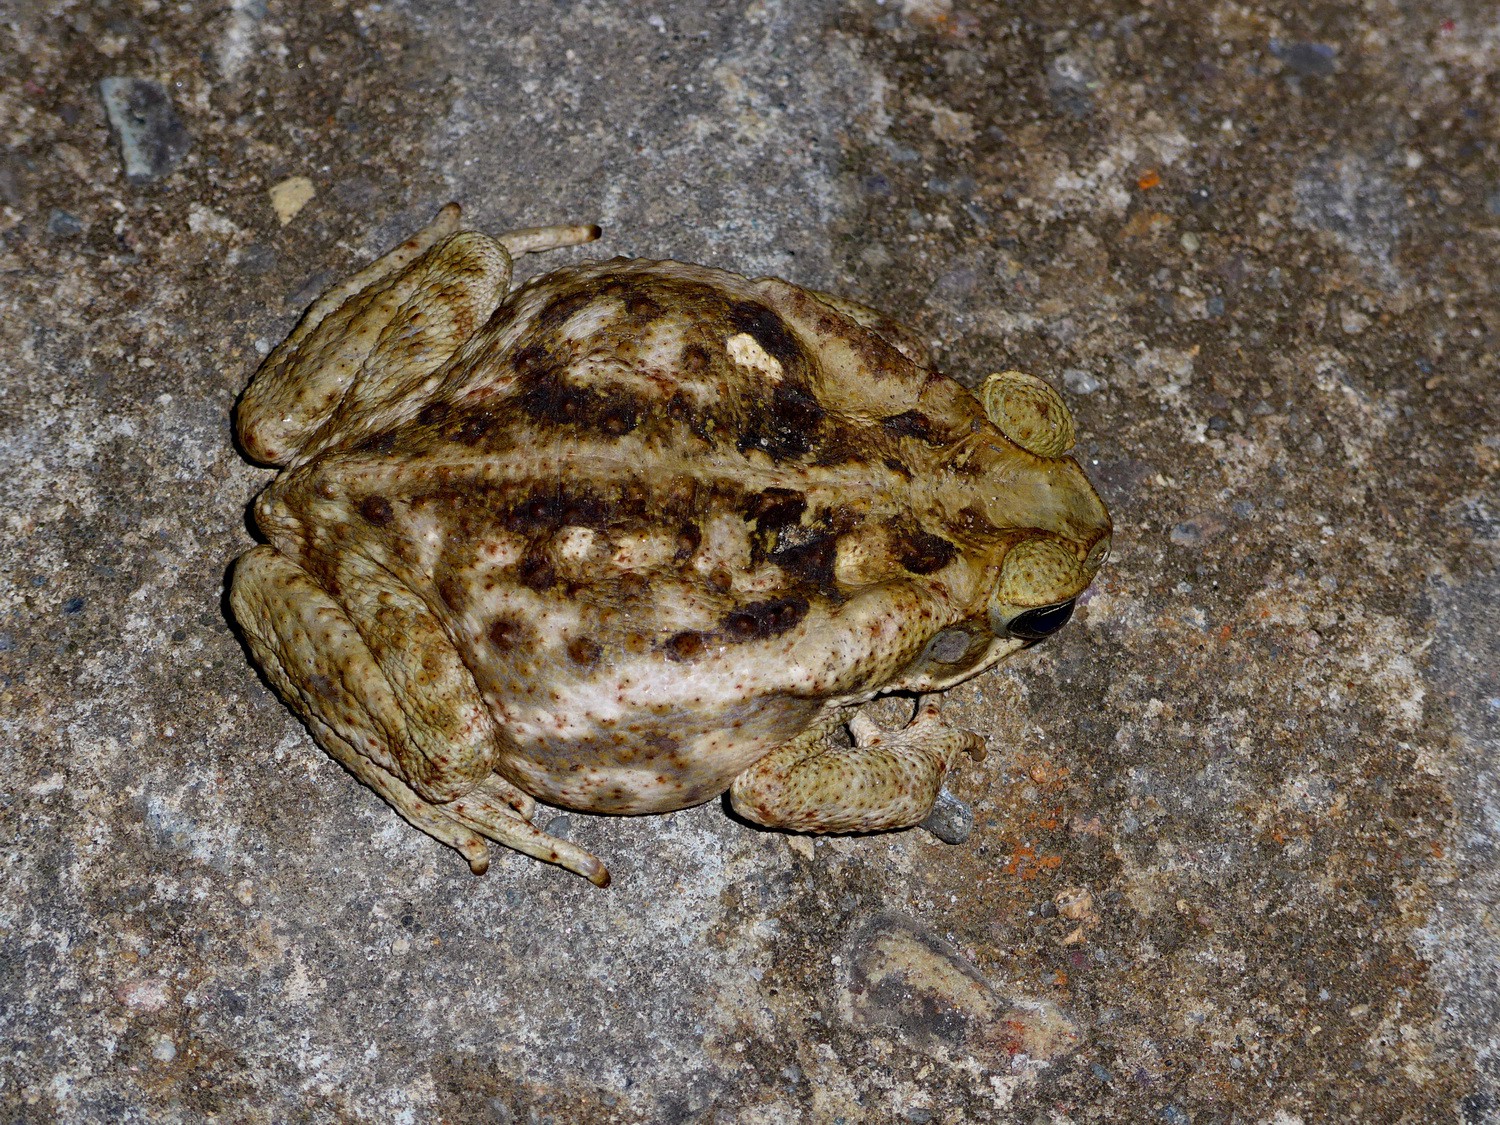 Huge Toad on San Agustin's marketplace